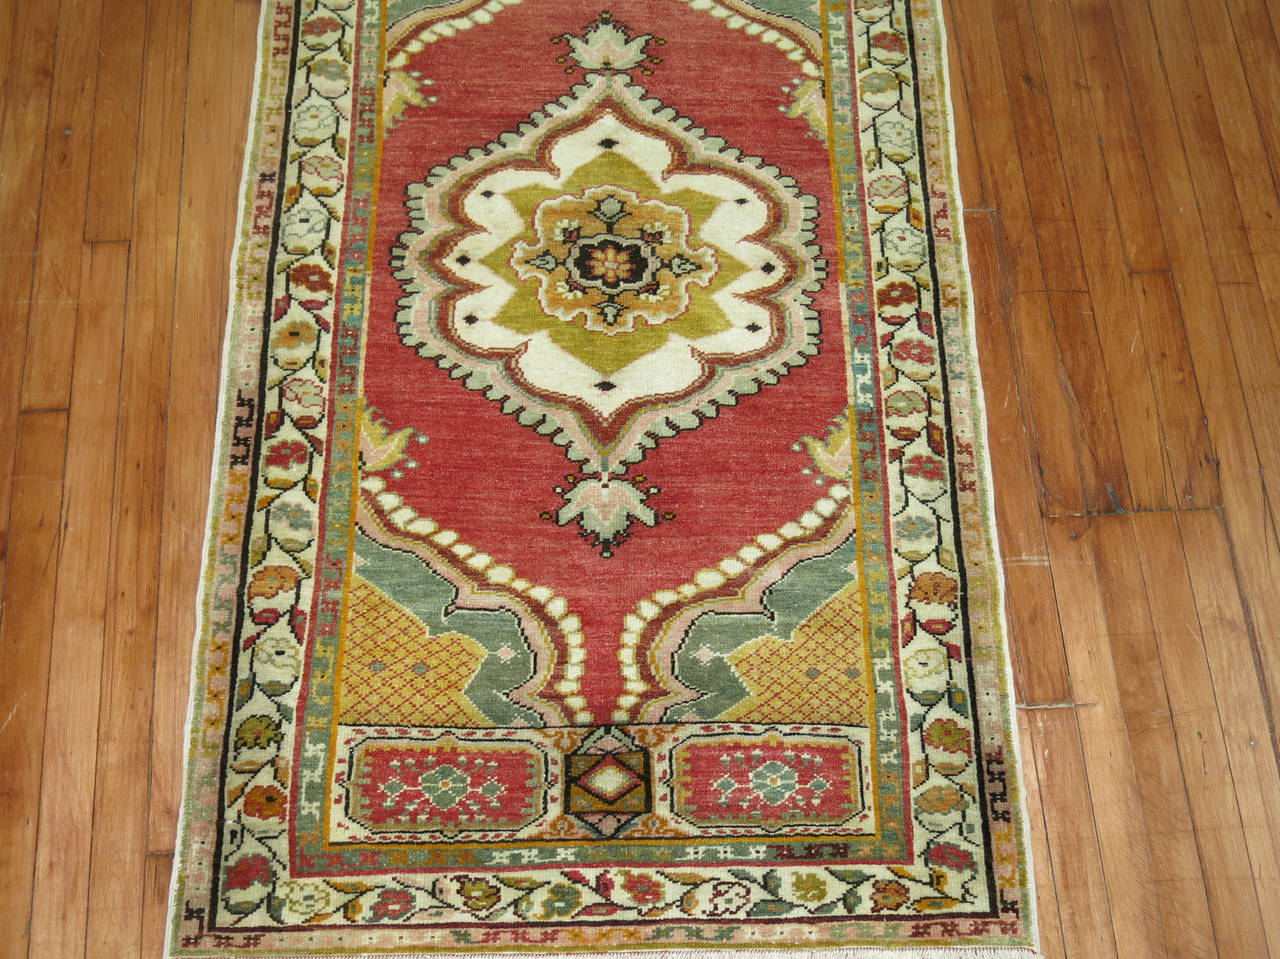 Vintage rug from Oushak with elaborate centre medallion and border.